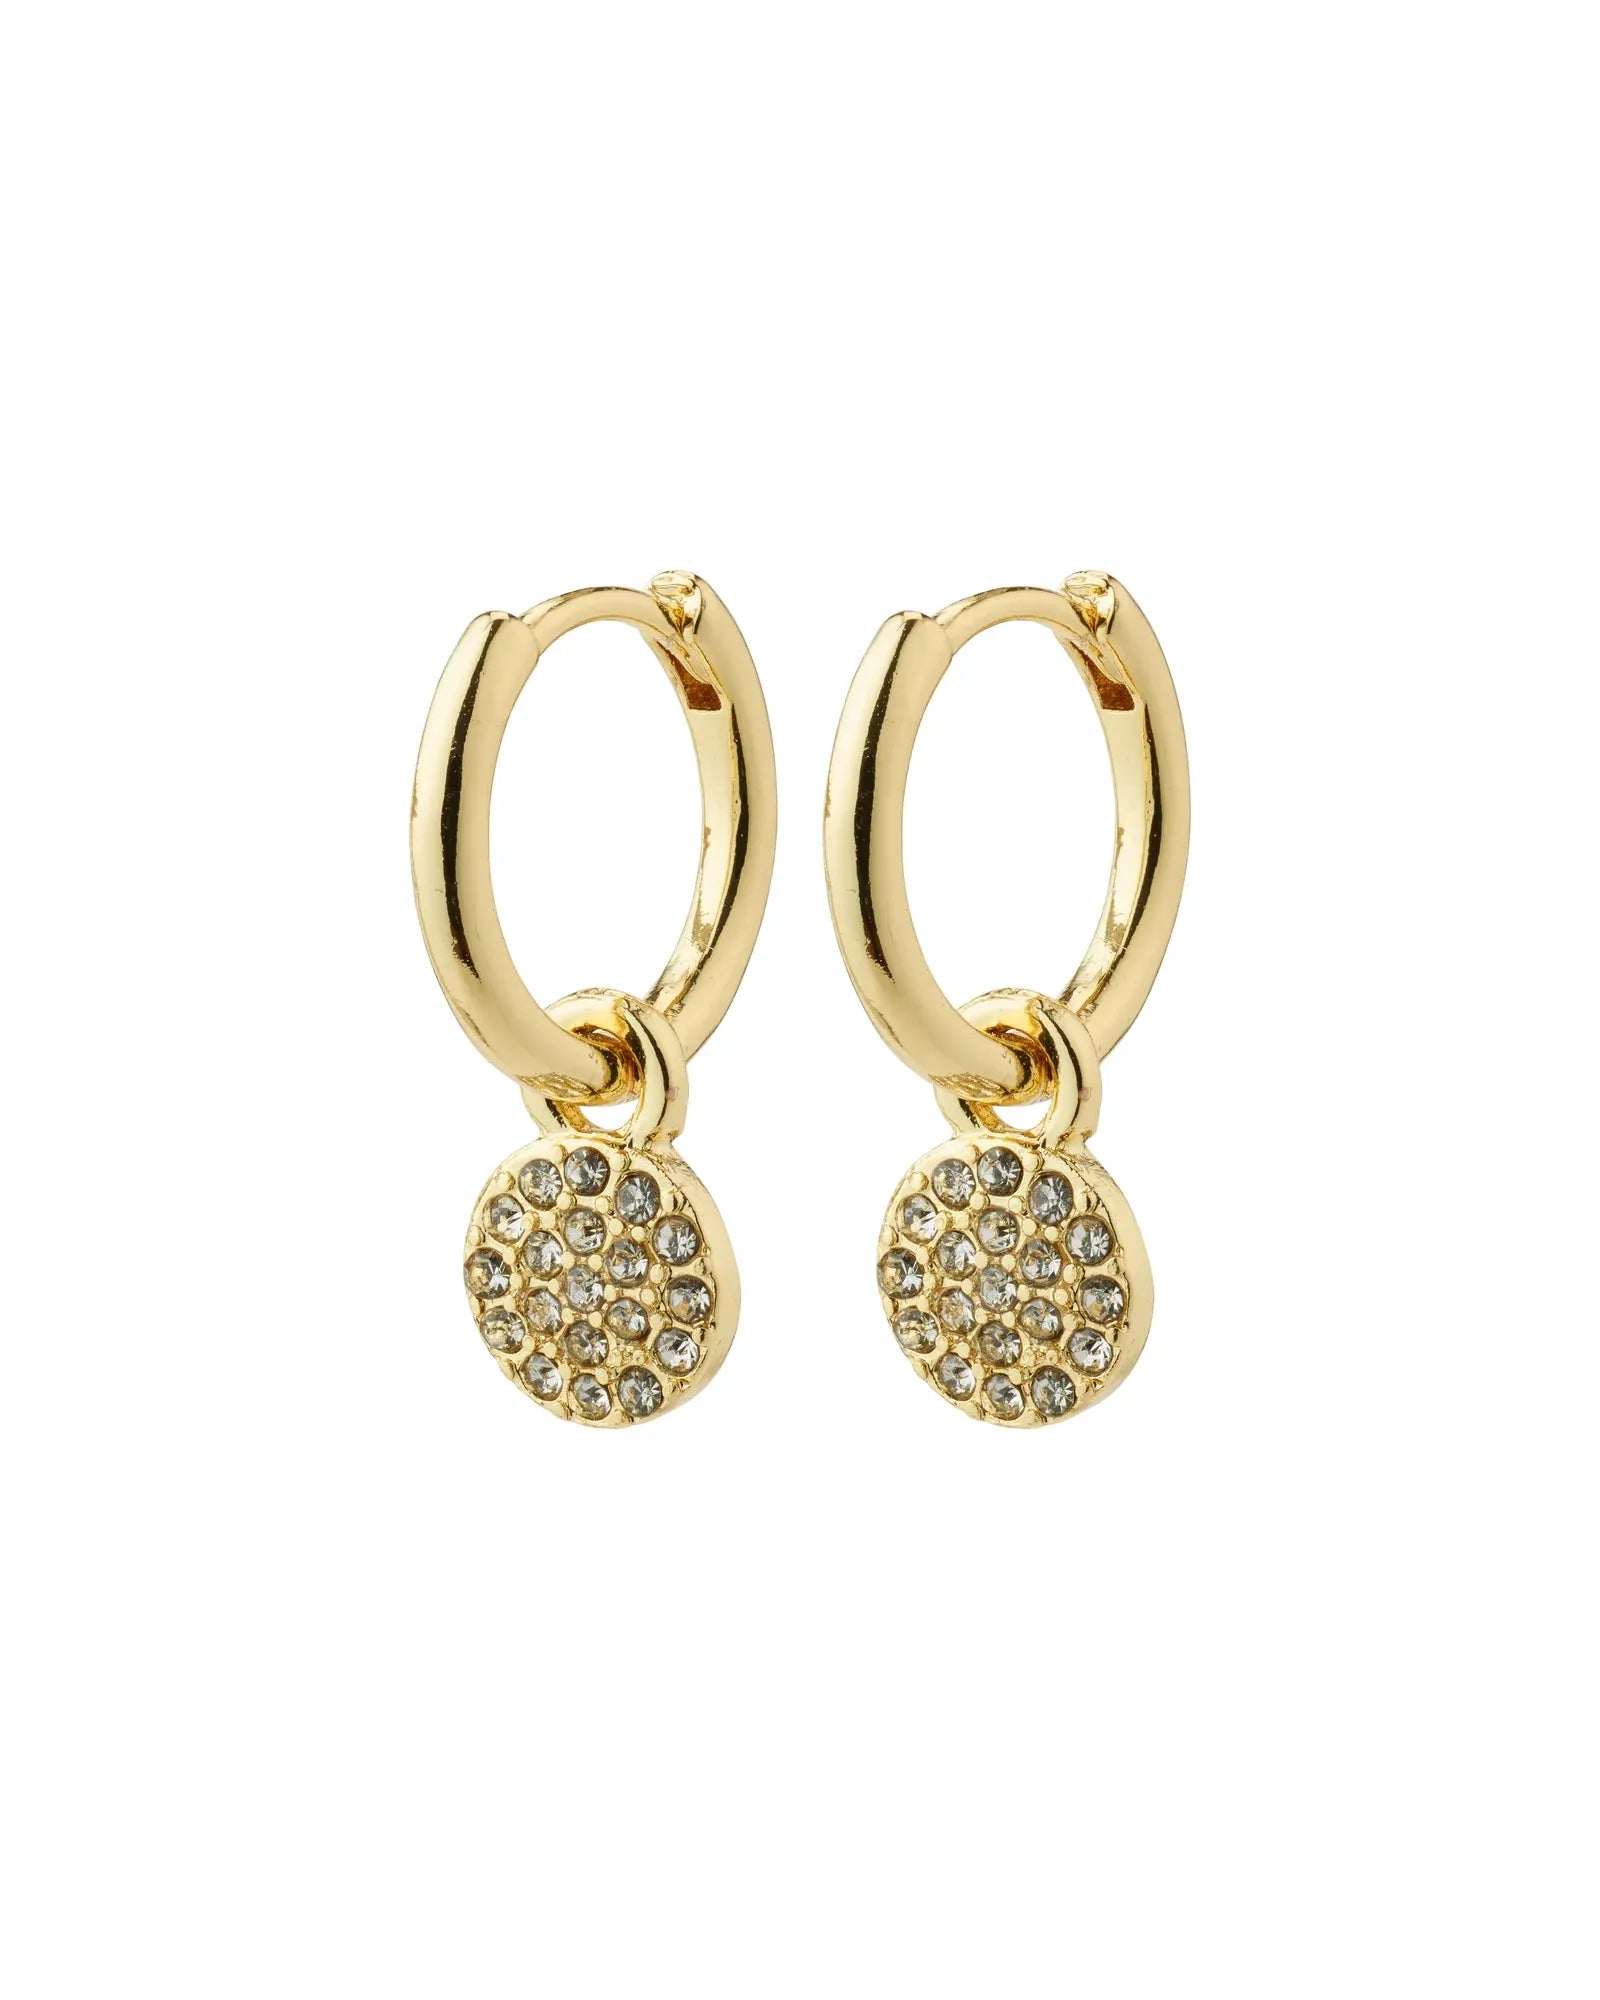 CHAYENNE Recycled Crystal Hoop Earrings - Gold Plated